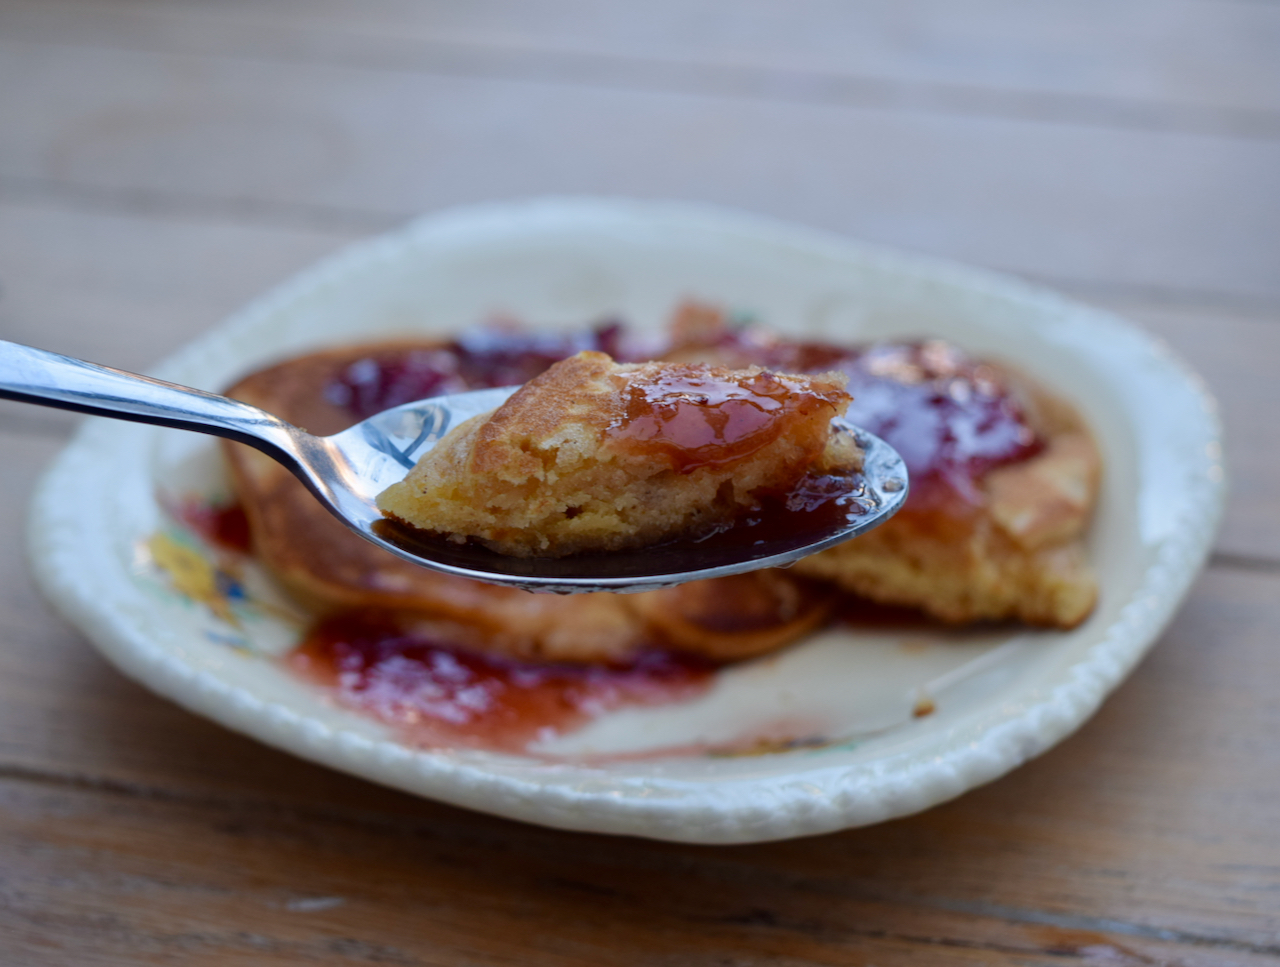 PB and J Pancakes recipe from Lucy Loves Food Blog